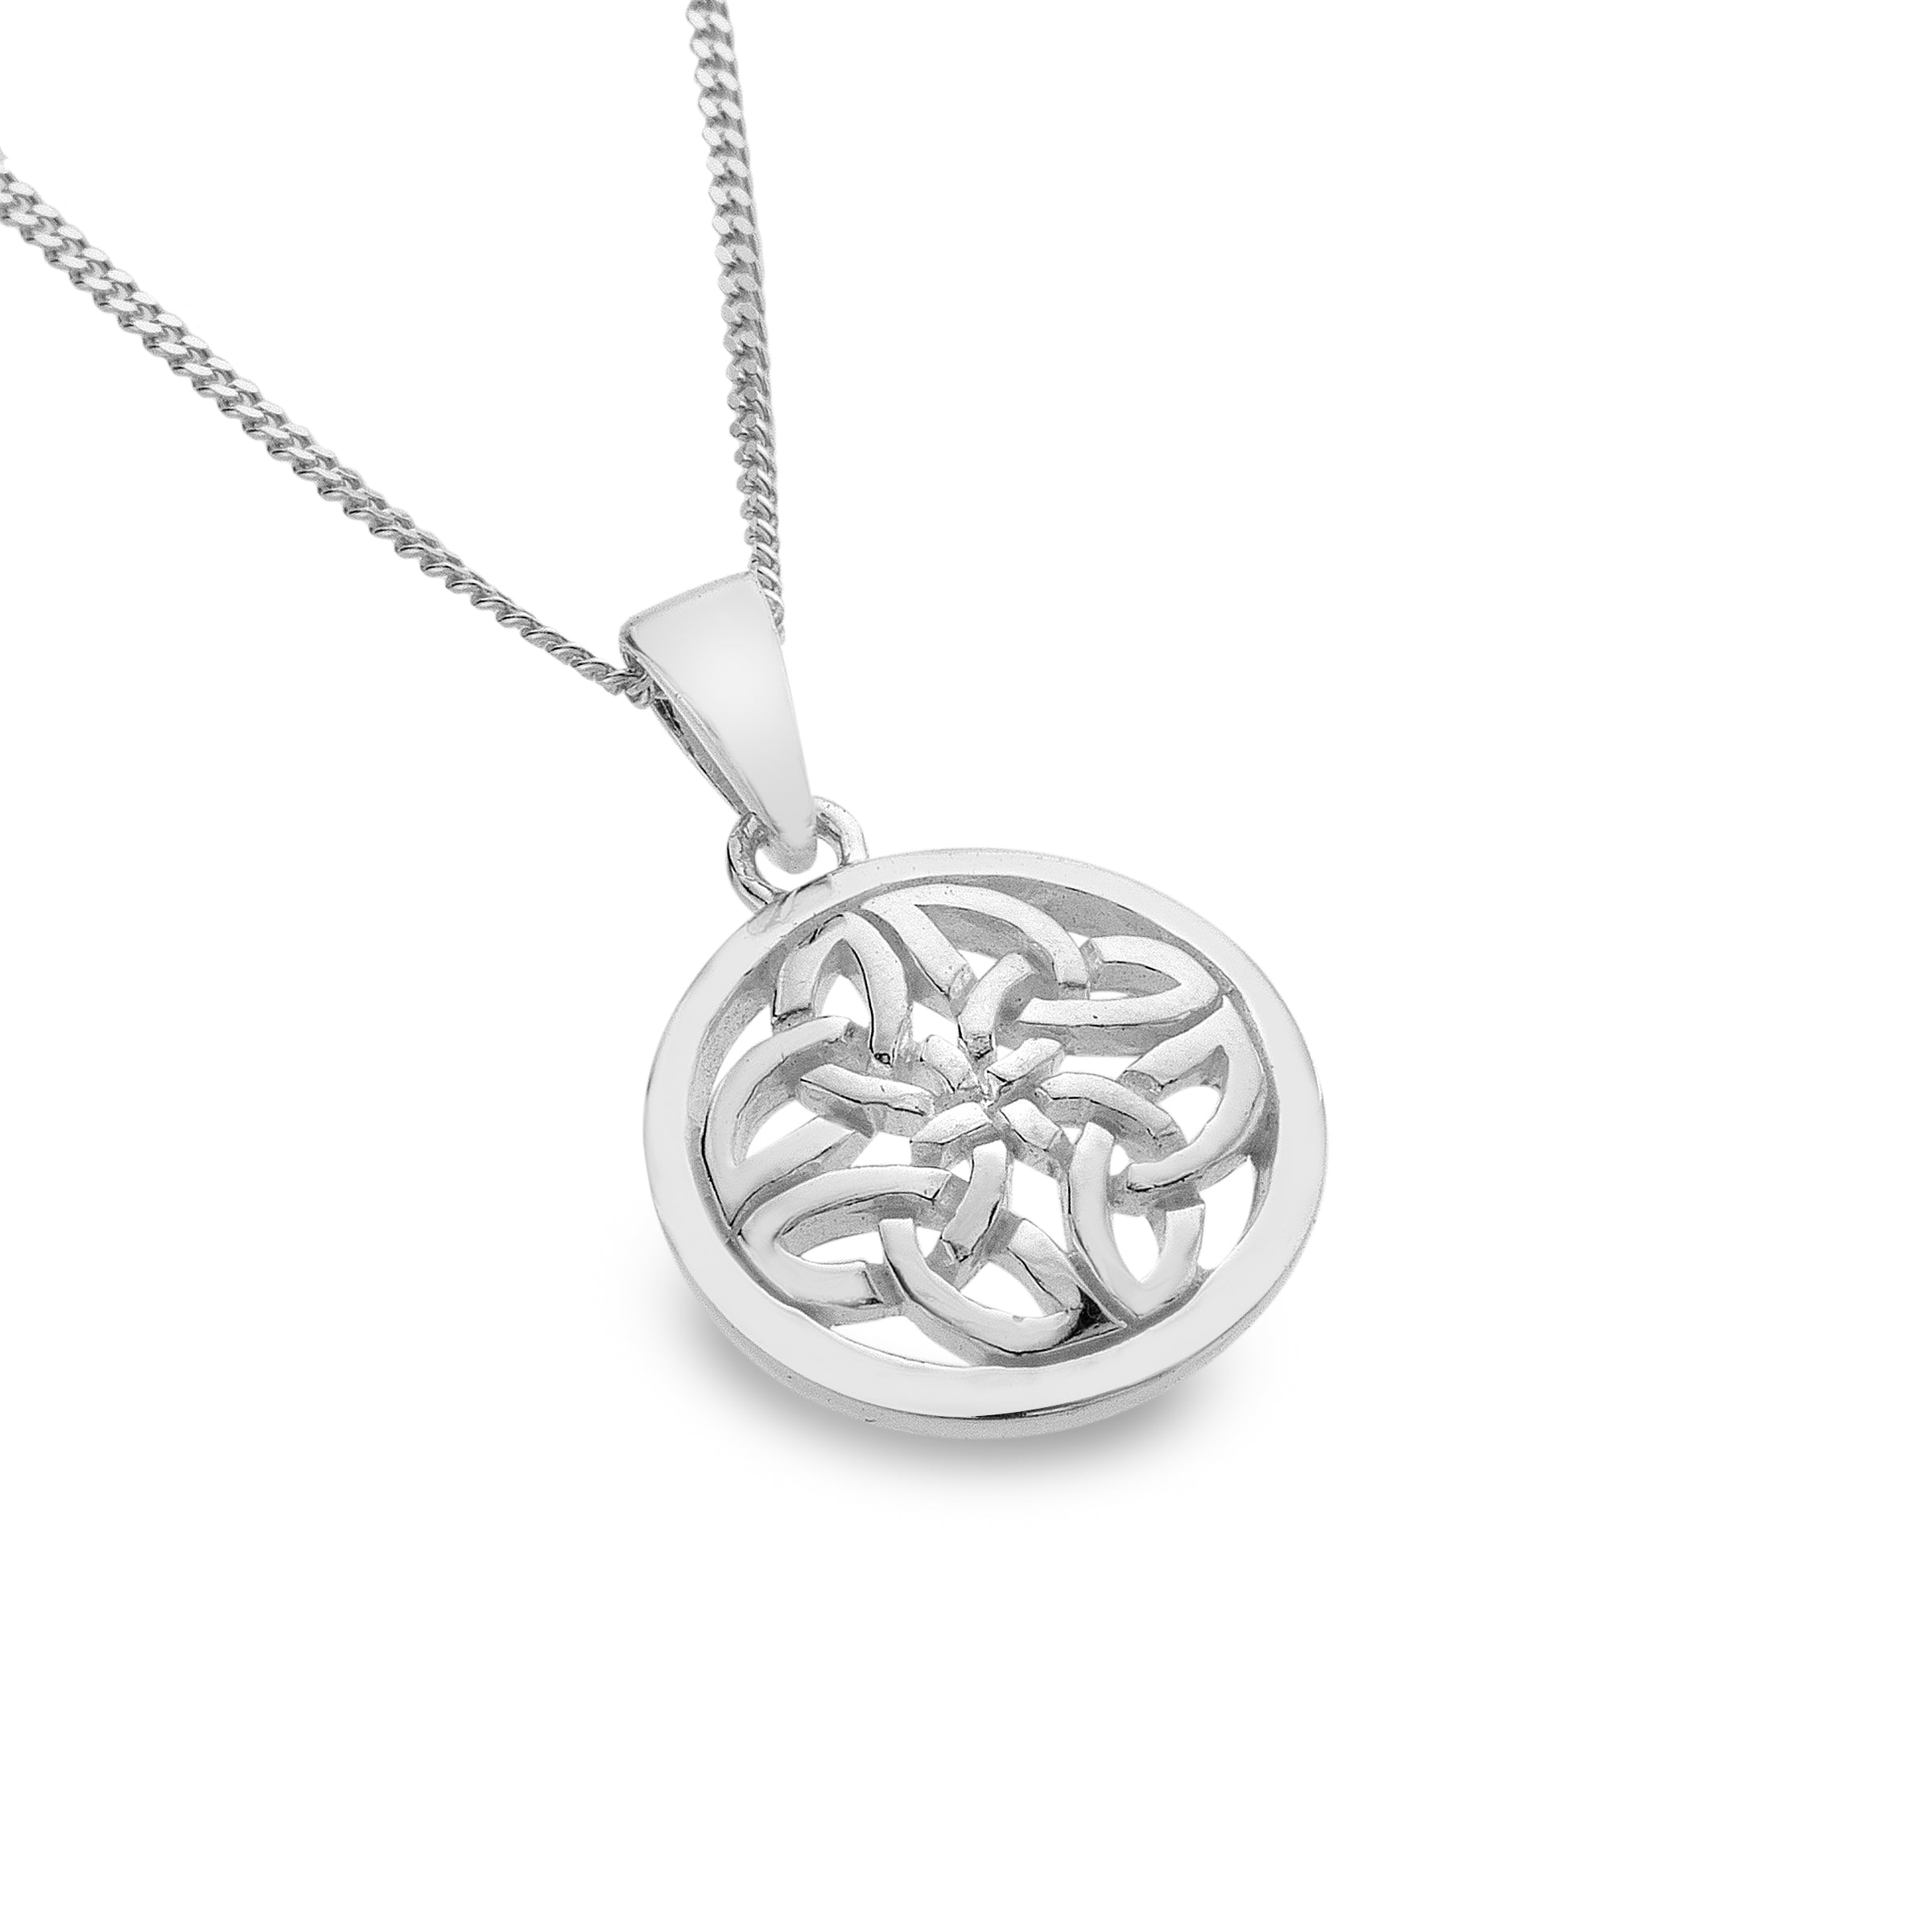 Celtic Knot Infinity Pendant Necklace in Sterling Silver, Unique Infinity,  Irish Jewelry, Infinity Necklace, Large Infinity, Mother's Day - Etsy |  Irish jewelry, Jewelry crafts, Infinity pendant